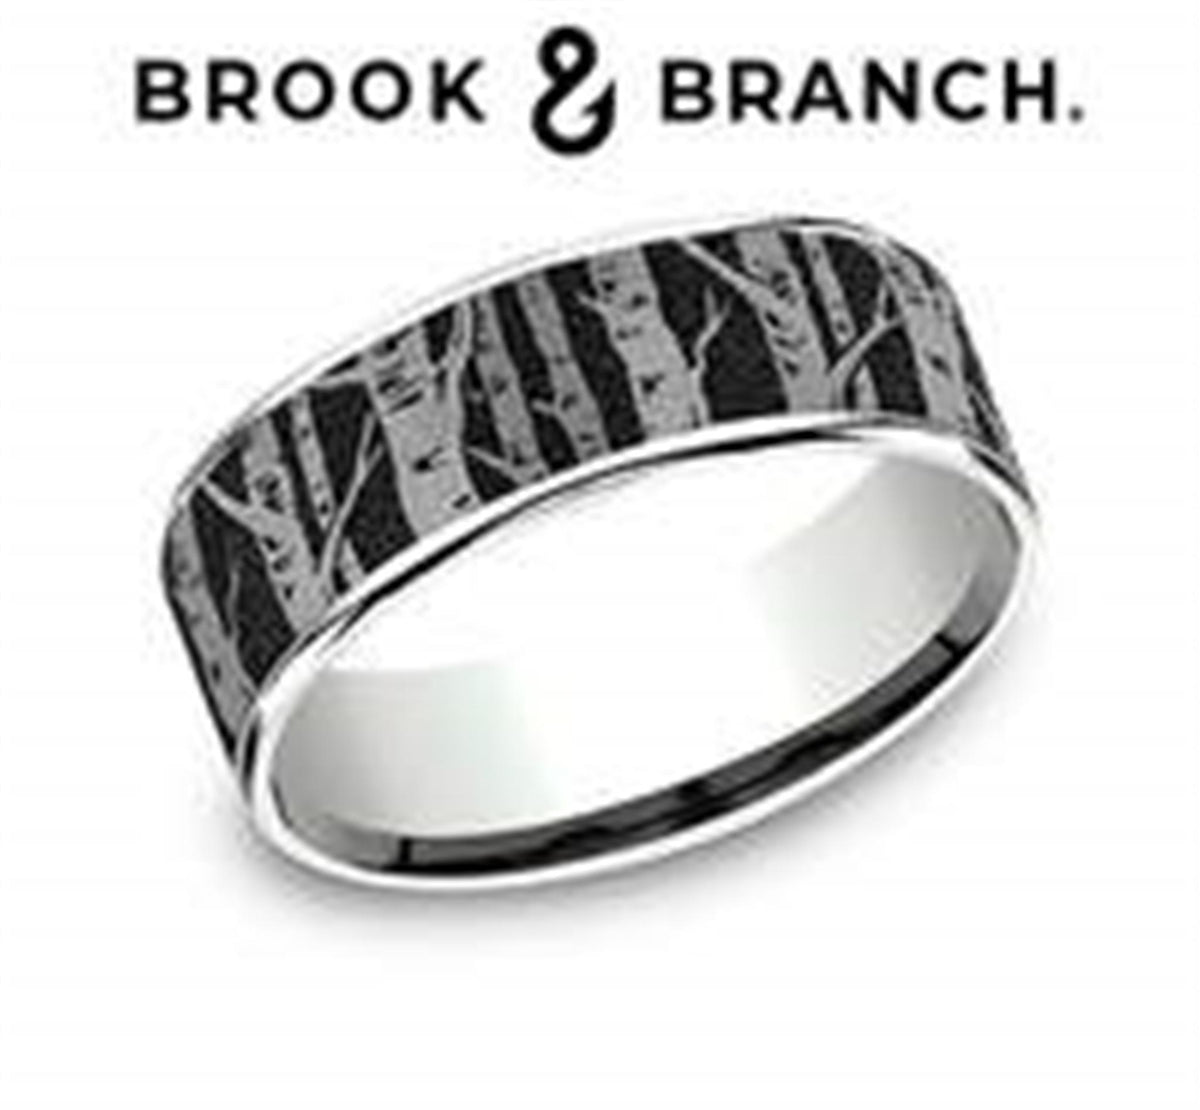 Brook & Branch 14Kt White Gold And Black Titanium Band